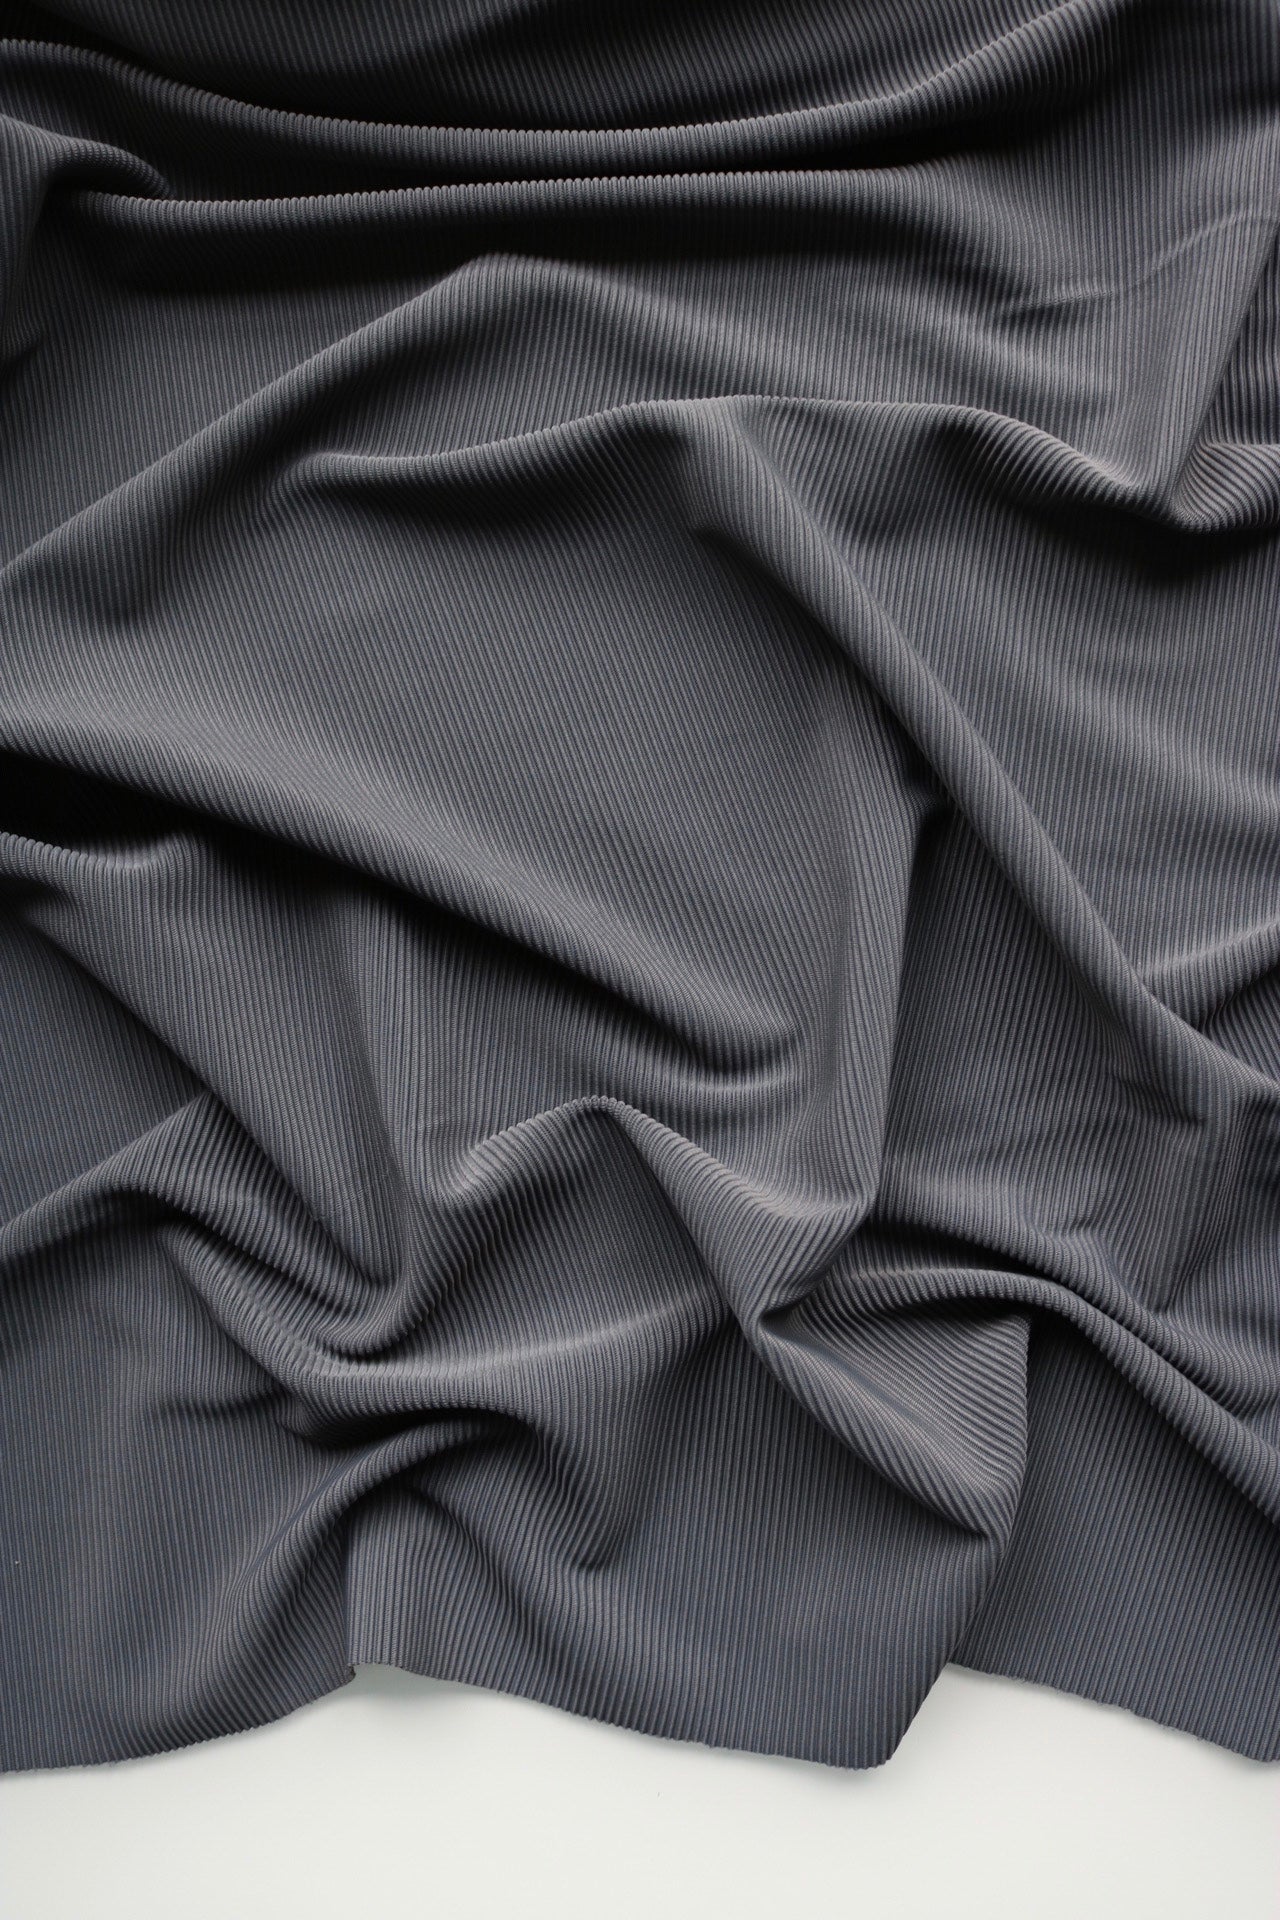 Polyester Spandex Fabric  Double Sided Stretch Fleece - Navy